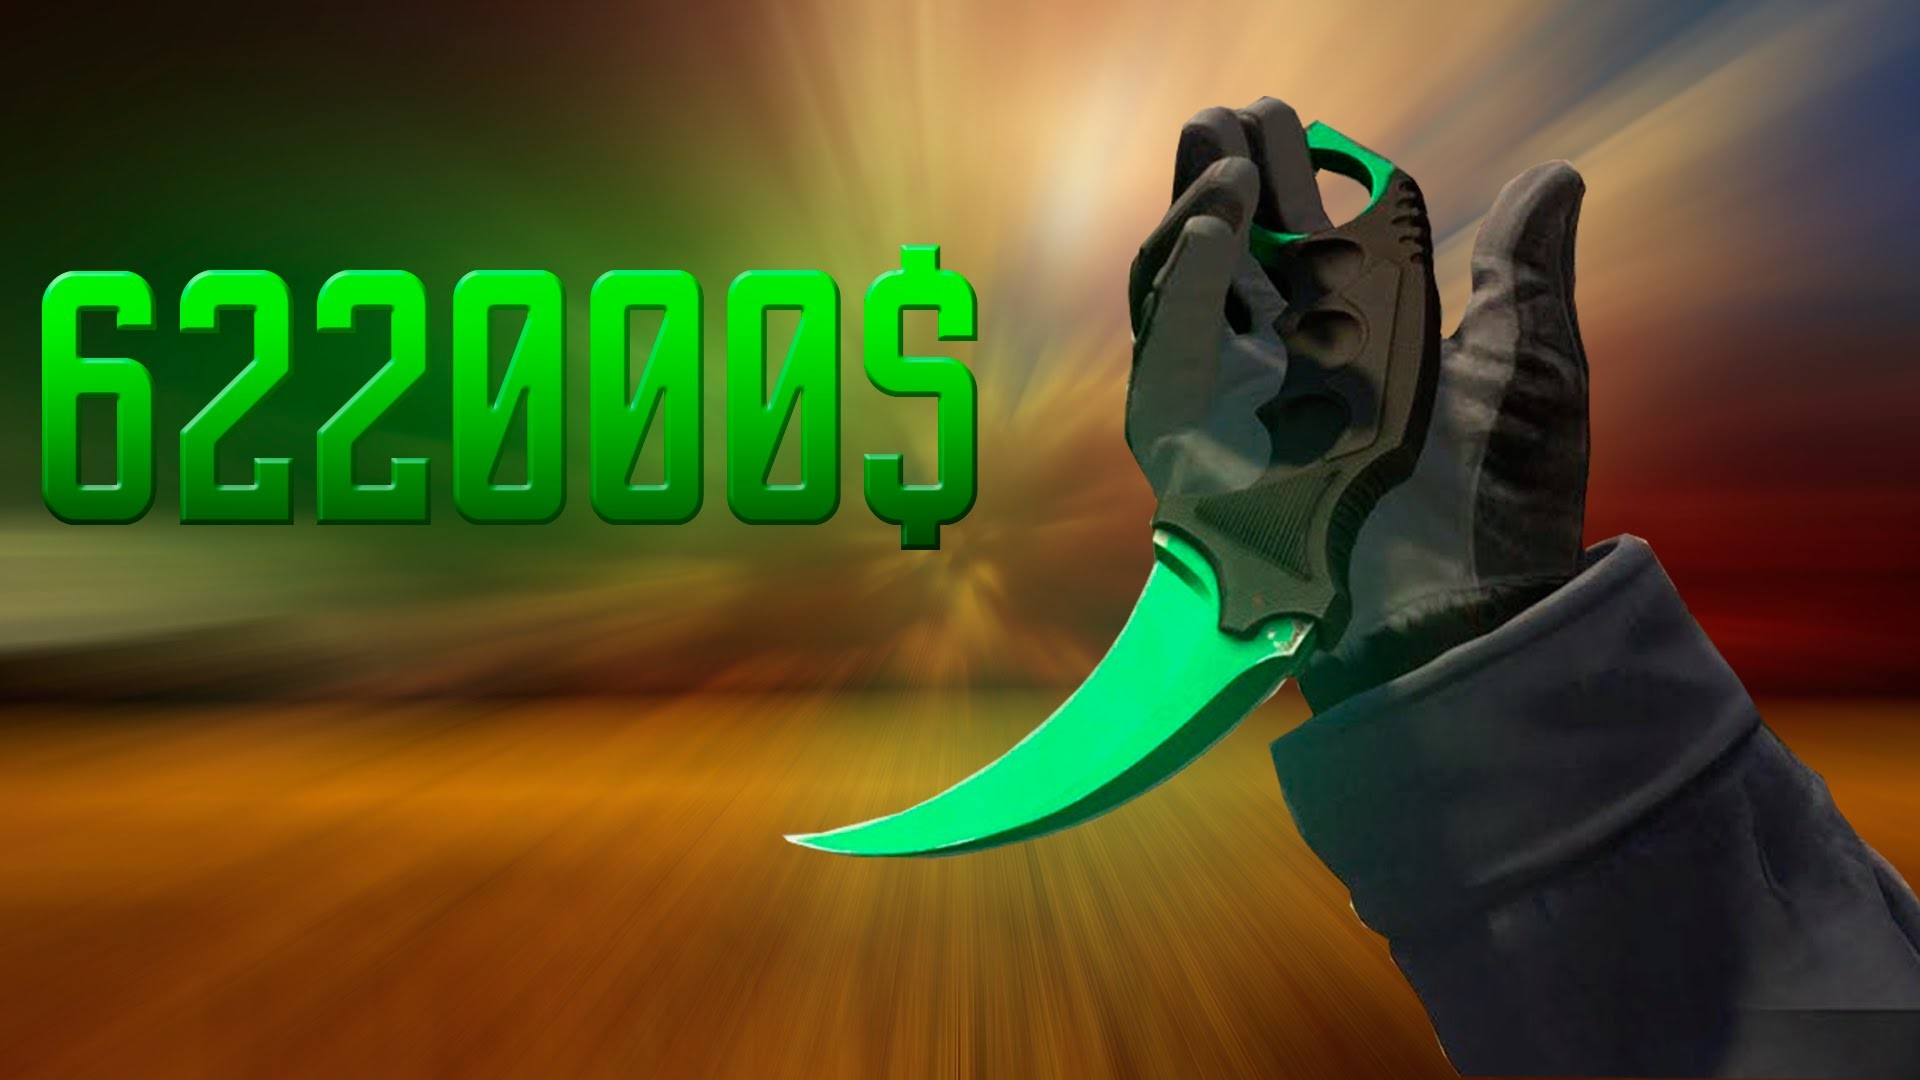 1920x1080 CS:GO - $622,000 Inventory (854 Knives) The Most EXPENSIVE Steam Inventory  in 2016! - YouTube